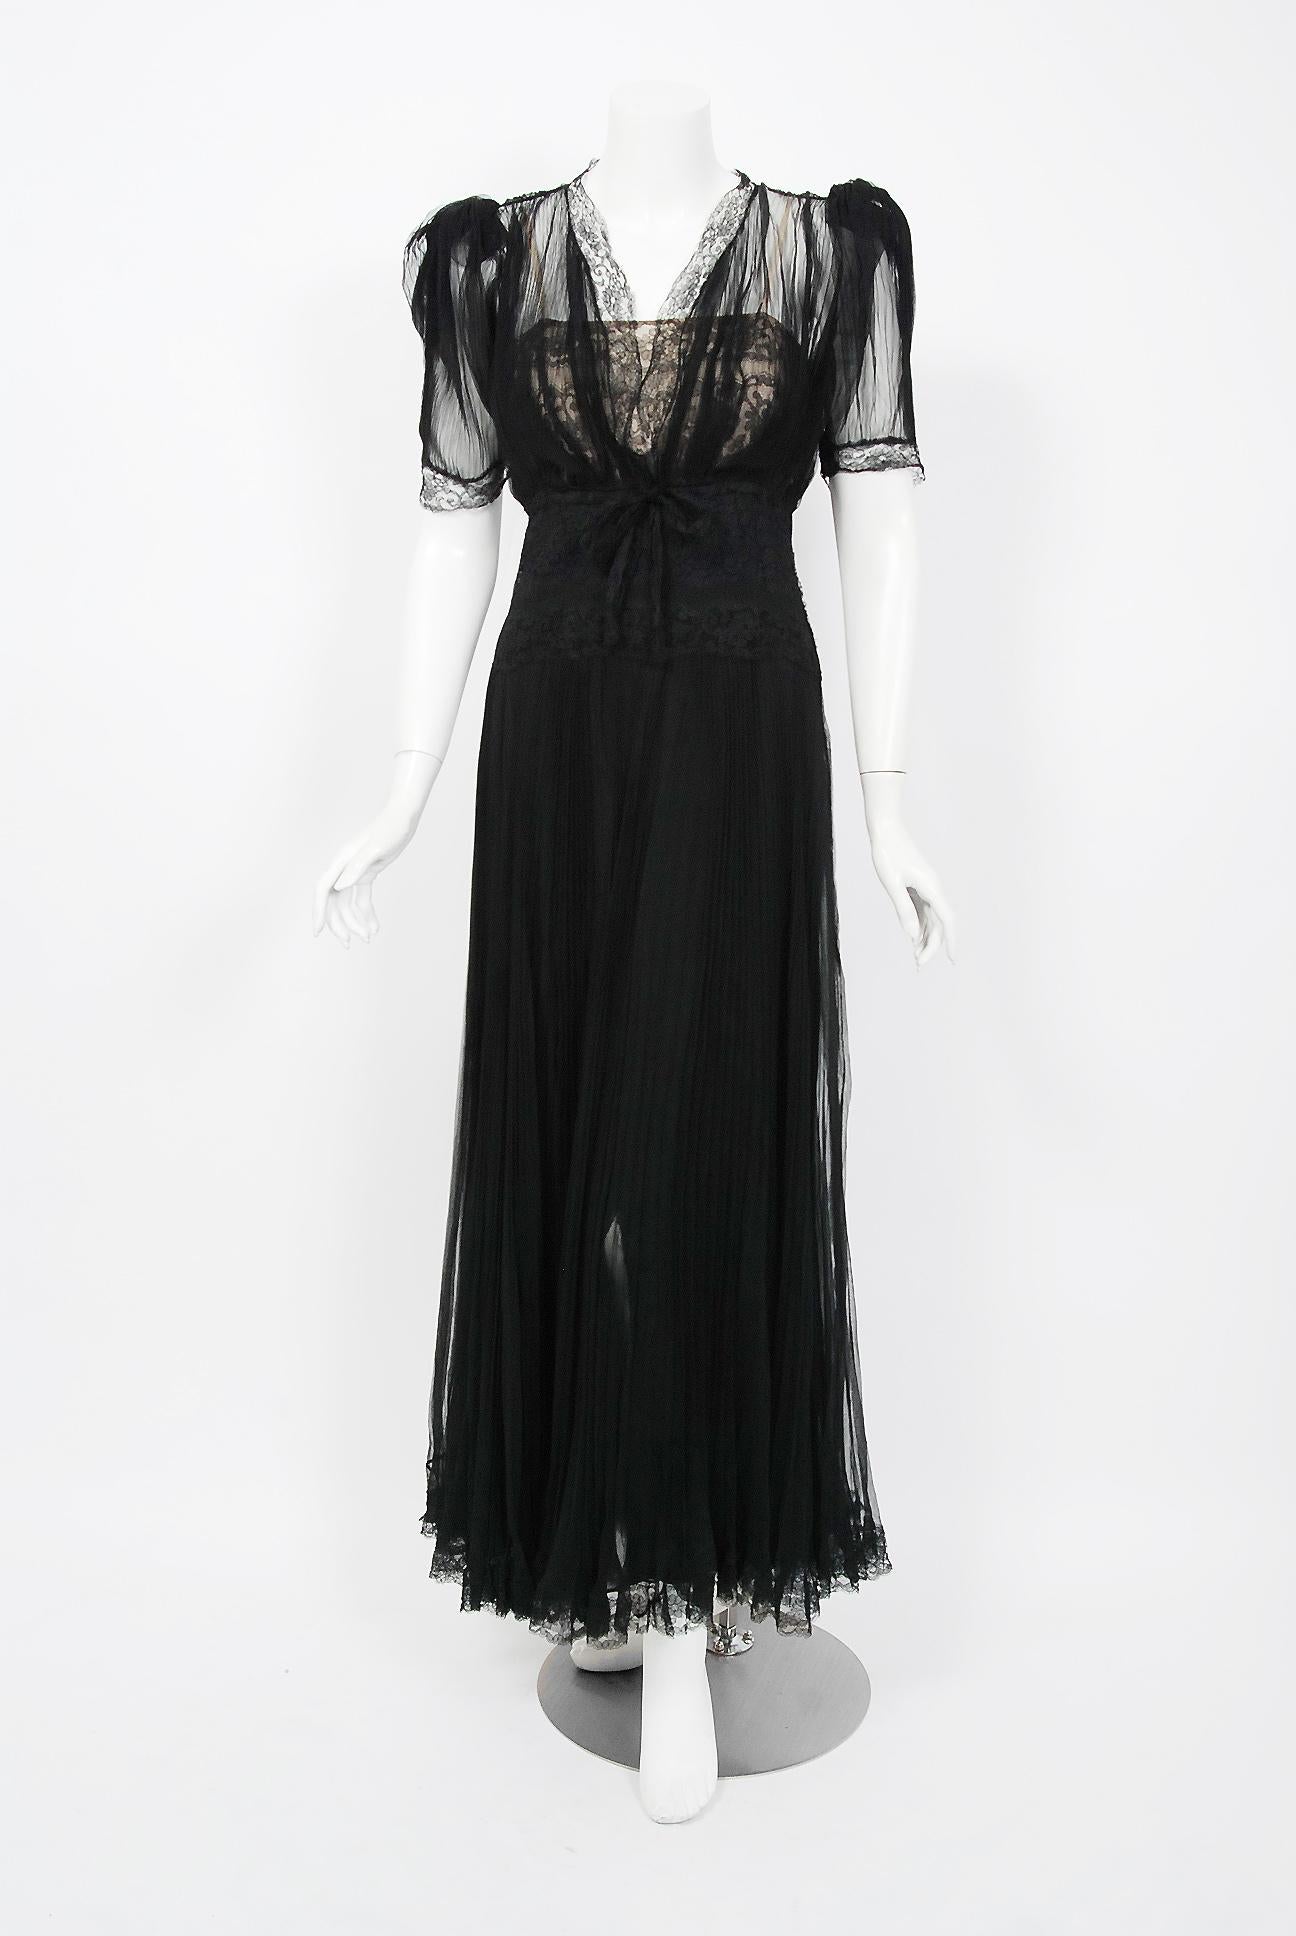 Breathtaking Hattie Carnegie Couture black semi-sheer dress dating back to her 1938 partership with Swanson. The name Hattie Carnegie is very often associated with elegance and high fashion. Carnegie’s fashion philosophy is summed up as 